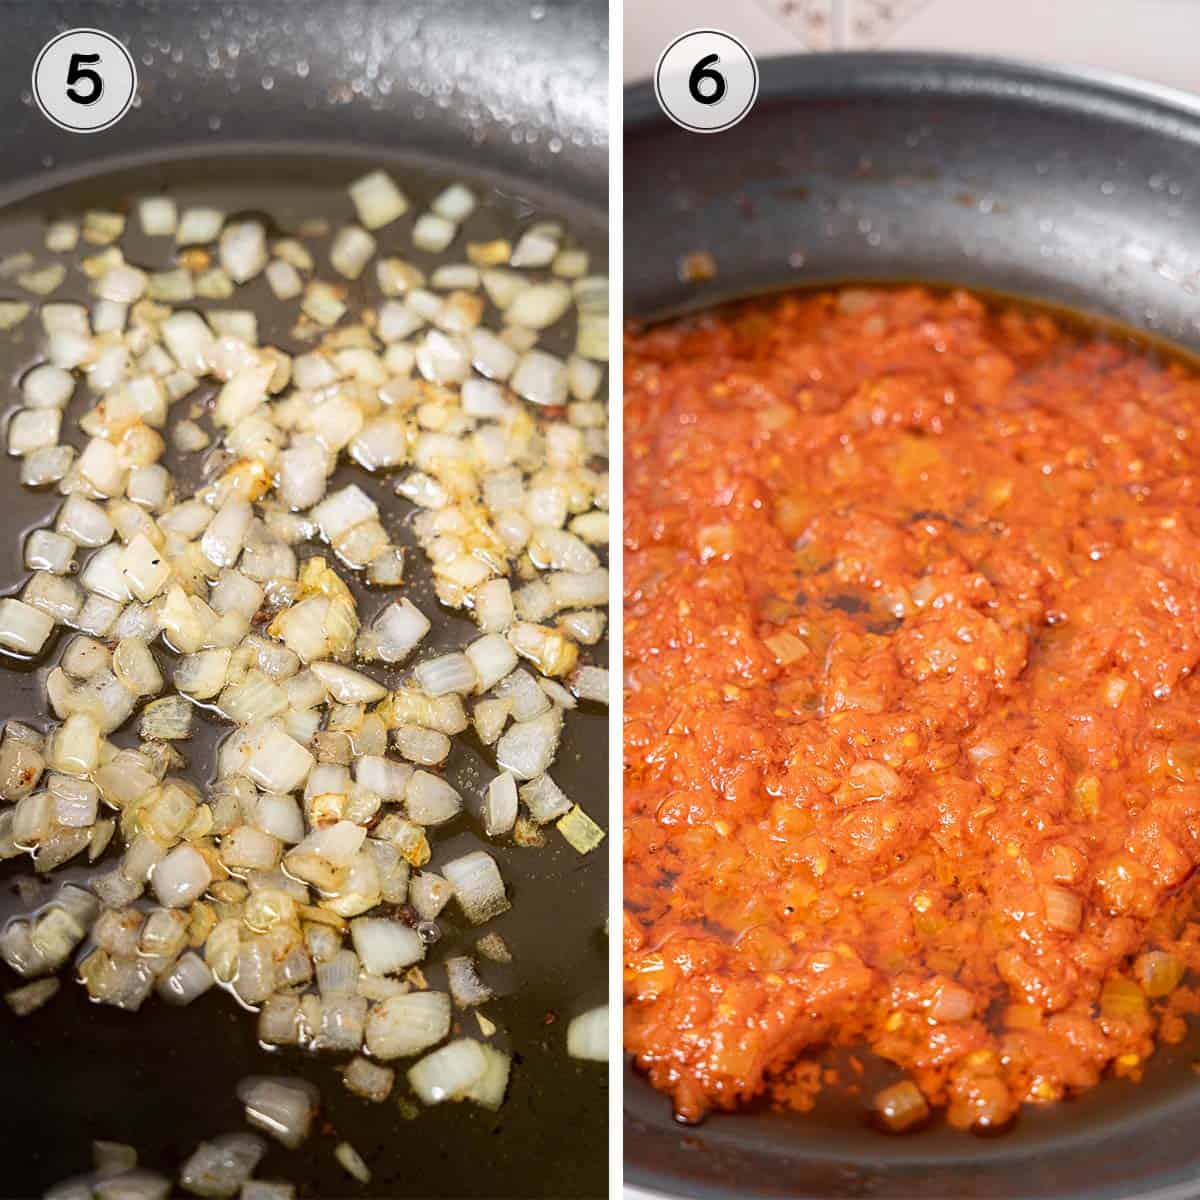 cooking onion and tomato mixture.